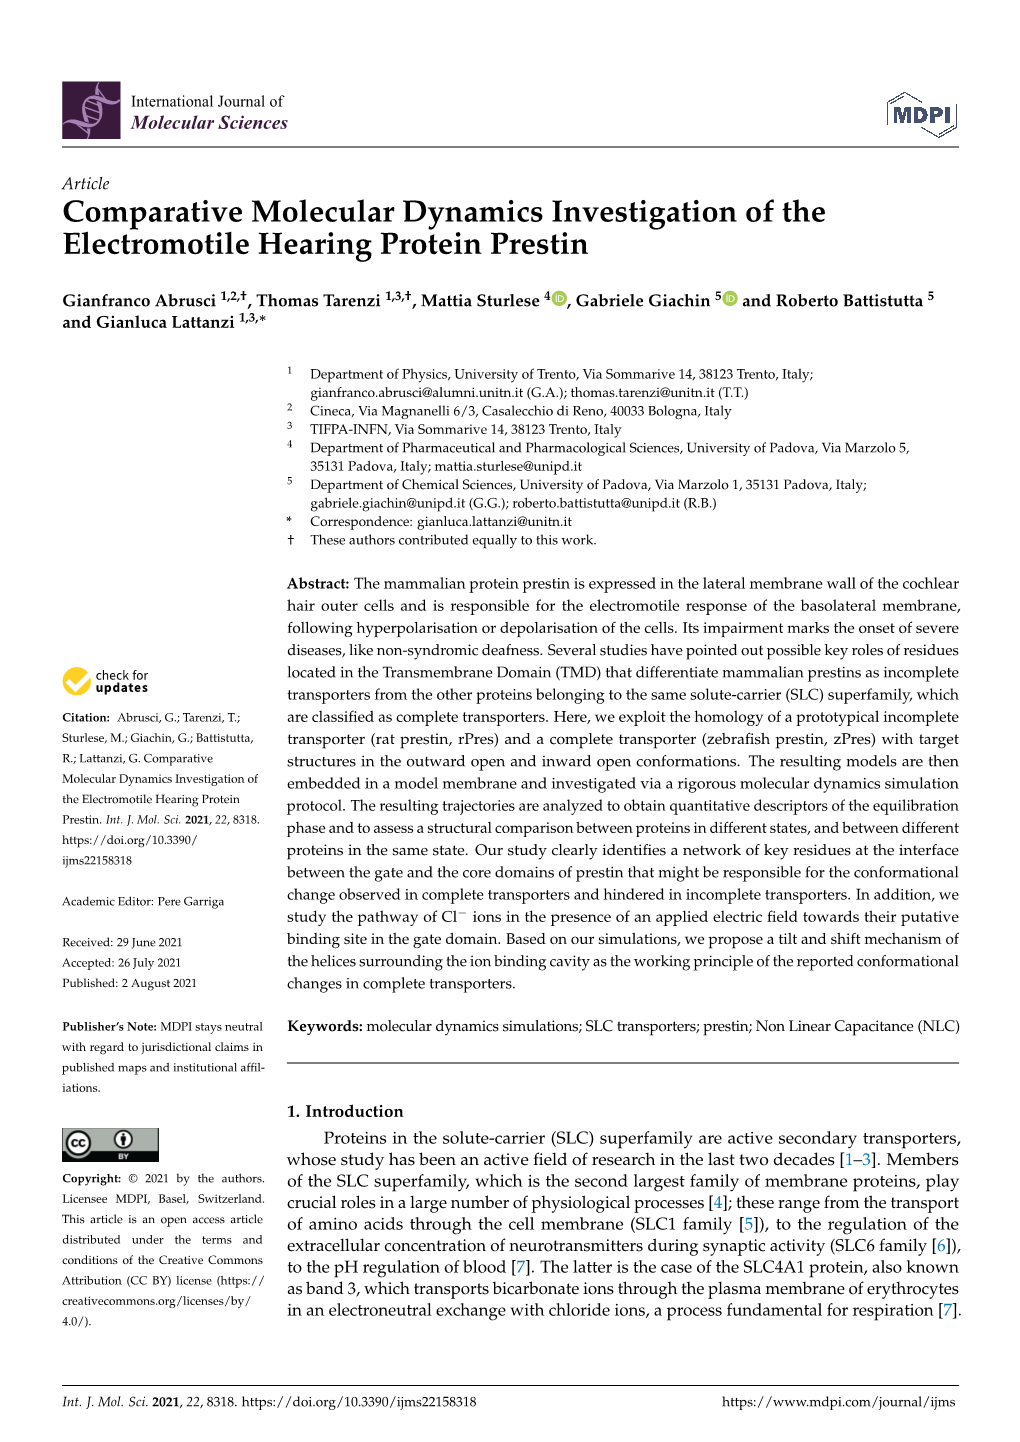 Comparative Molecular Dynamics Investigation of the Electromotile Hearing Protein Prestin